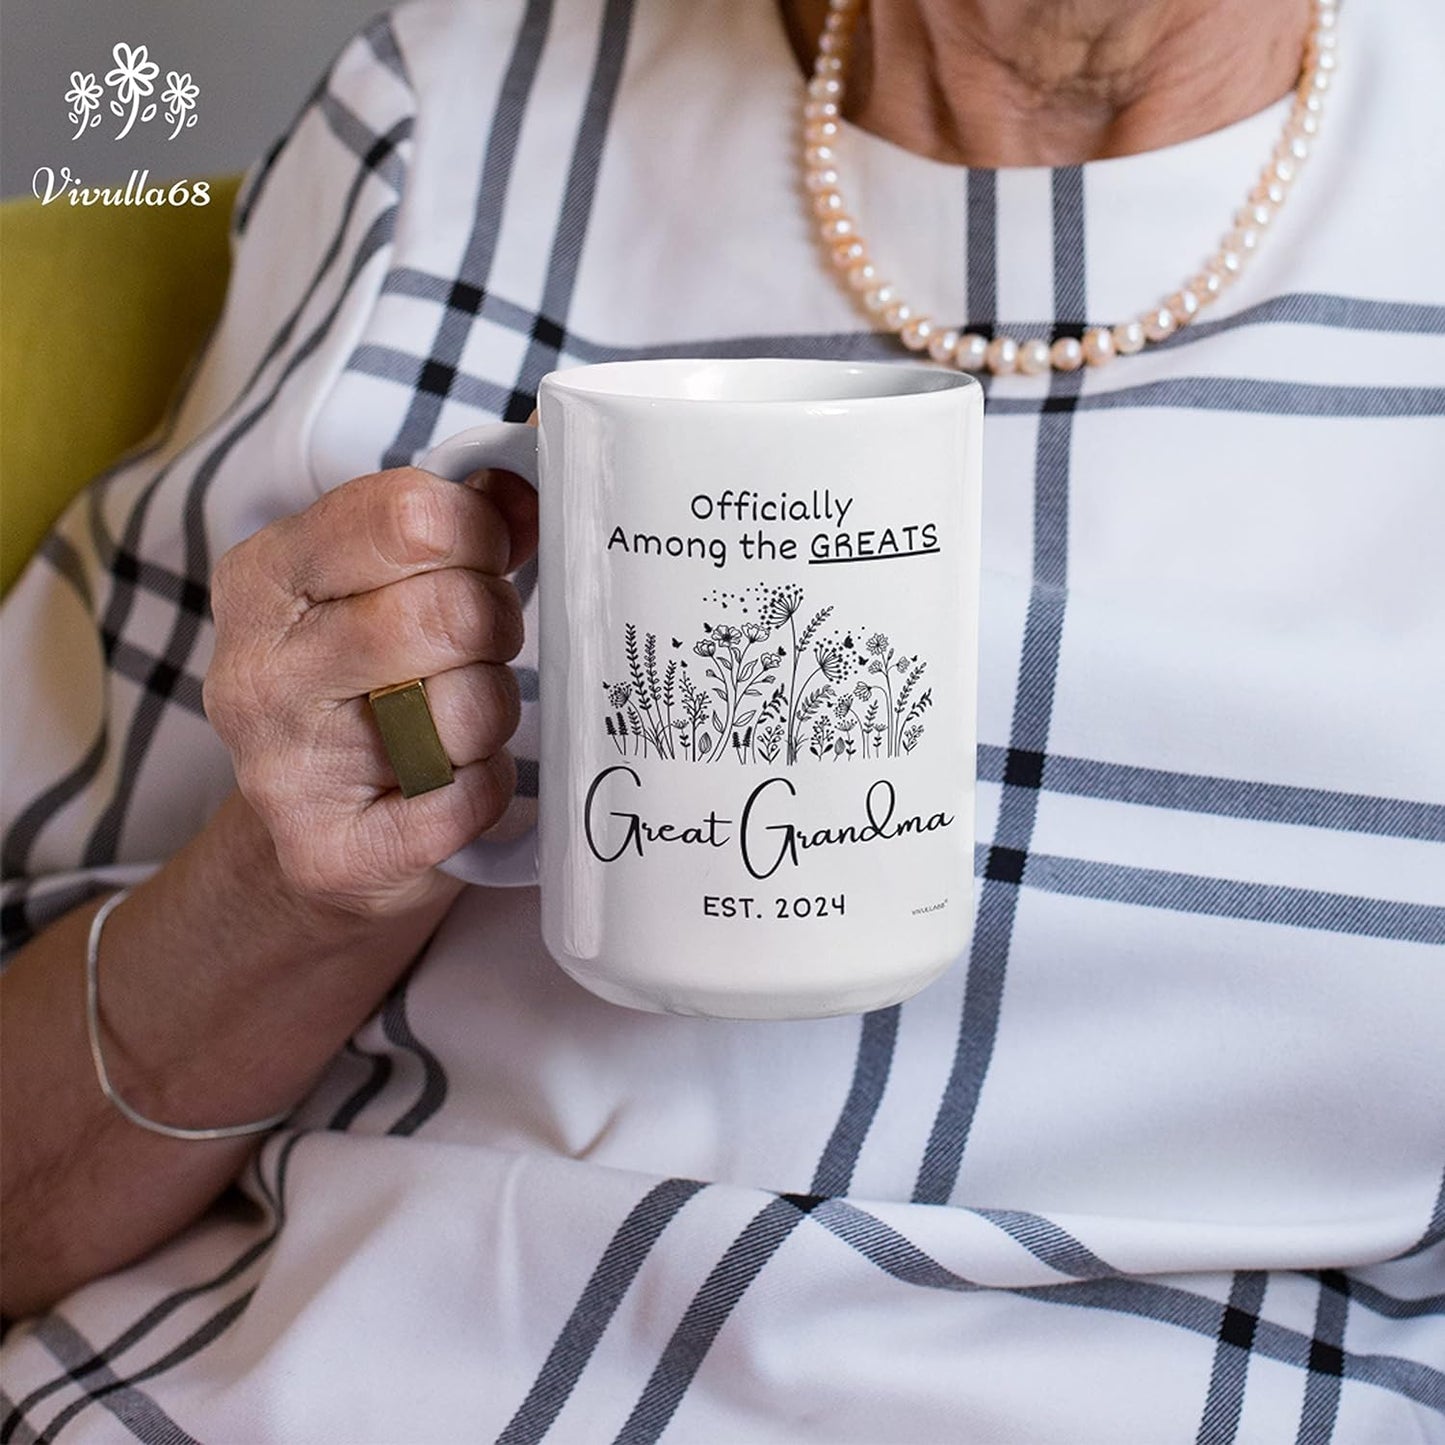 Vivulla68 Great Grandma Mug 2024, New Great Grandma Gifts, Youre Going To Be Great Grandparents Gifts, Presents For Great Grandma Pregnancy Announcement, Happy Mothers Day Gifts for Great Grandmother